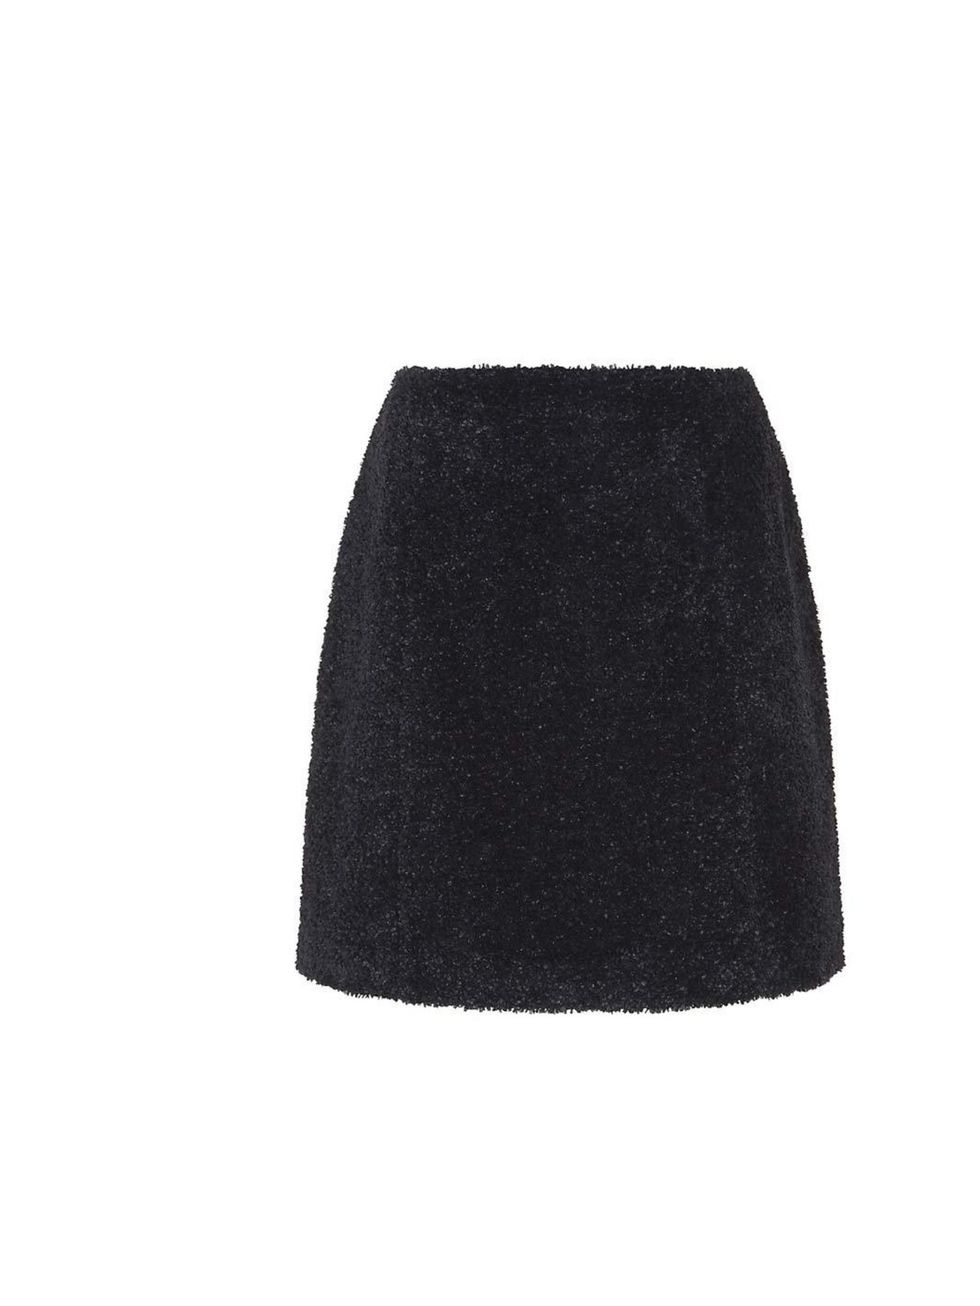 <p>Embrace this season's texture trend and pair this fuzzy 60s skirt with a mohair jumper for a cute clash. </p><p>Carven skirt, £400 at <a href="http://www.harrods.com/product/curly-tweed-mini-skirt/carven/000000000003498233?cat1=new-women&cat2=new-women